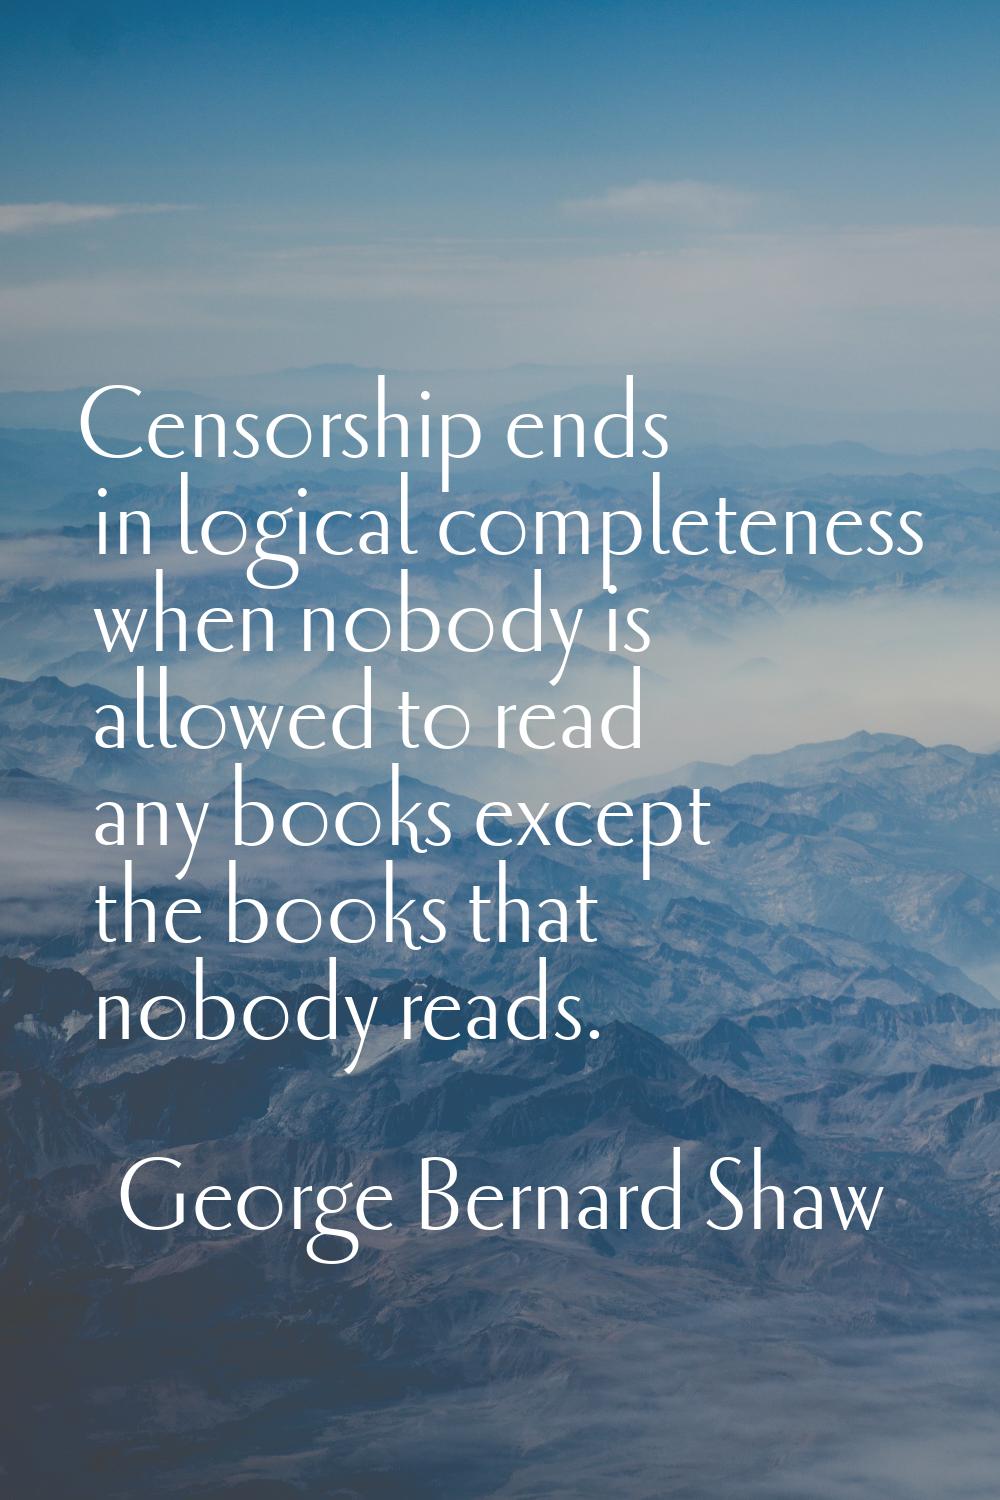 Censorship ends in logical completeness when nobody is allowed to read any books except the books t